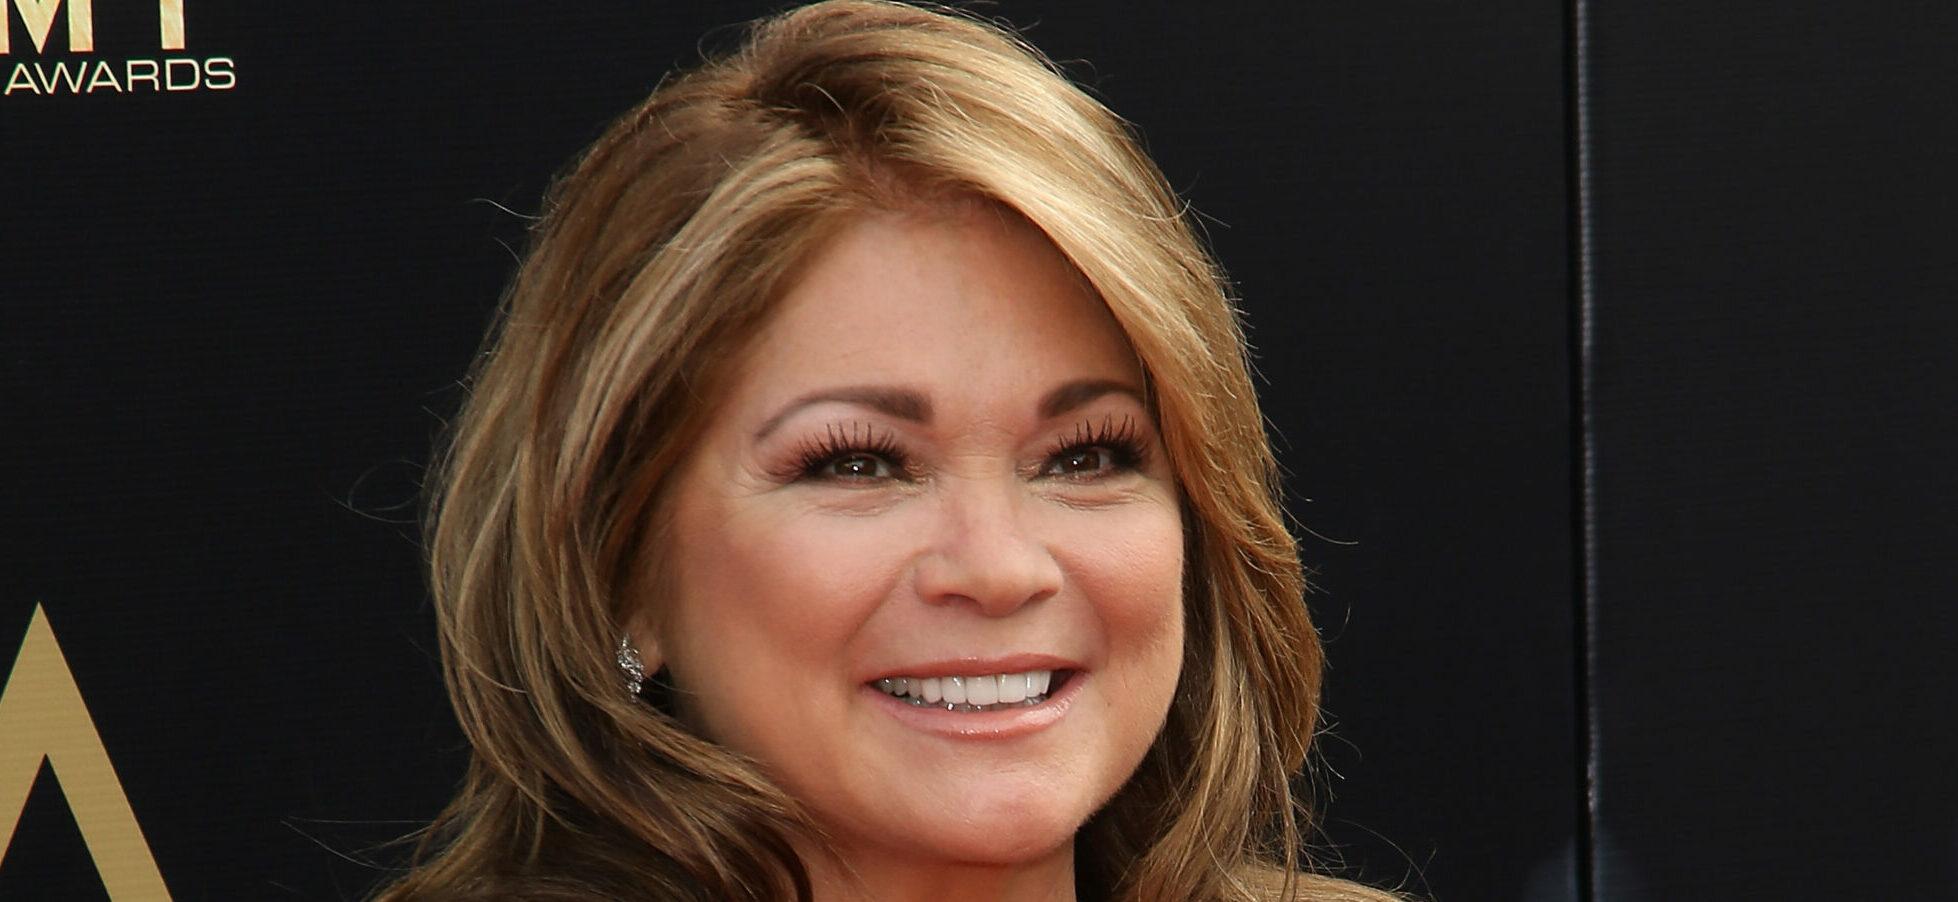 Valerie Bertinelli Brands Herself ‘Knight In Shining Armor’ After ‘Highest Of My Worst’ Last Year